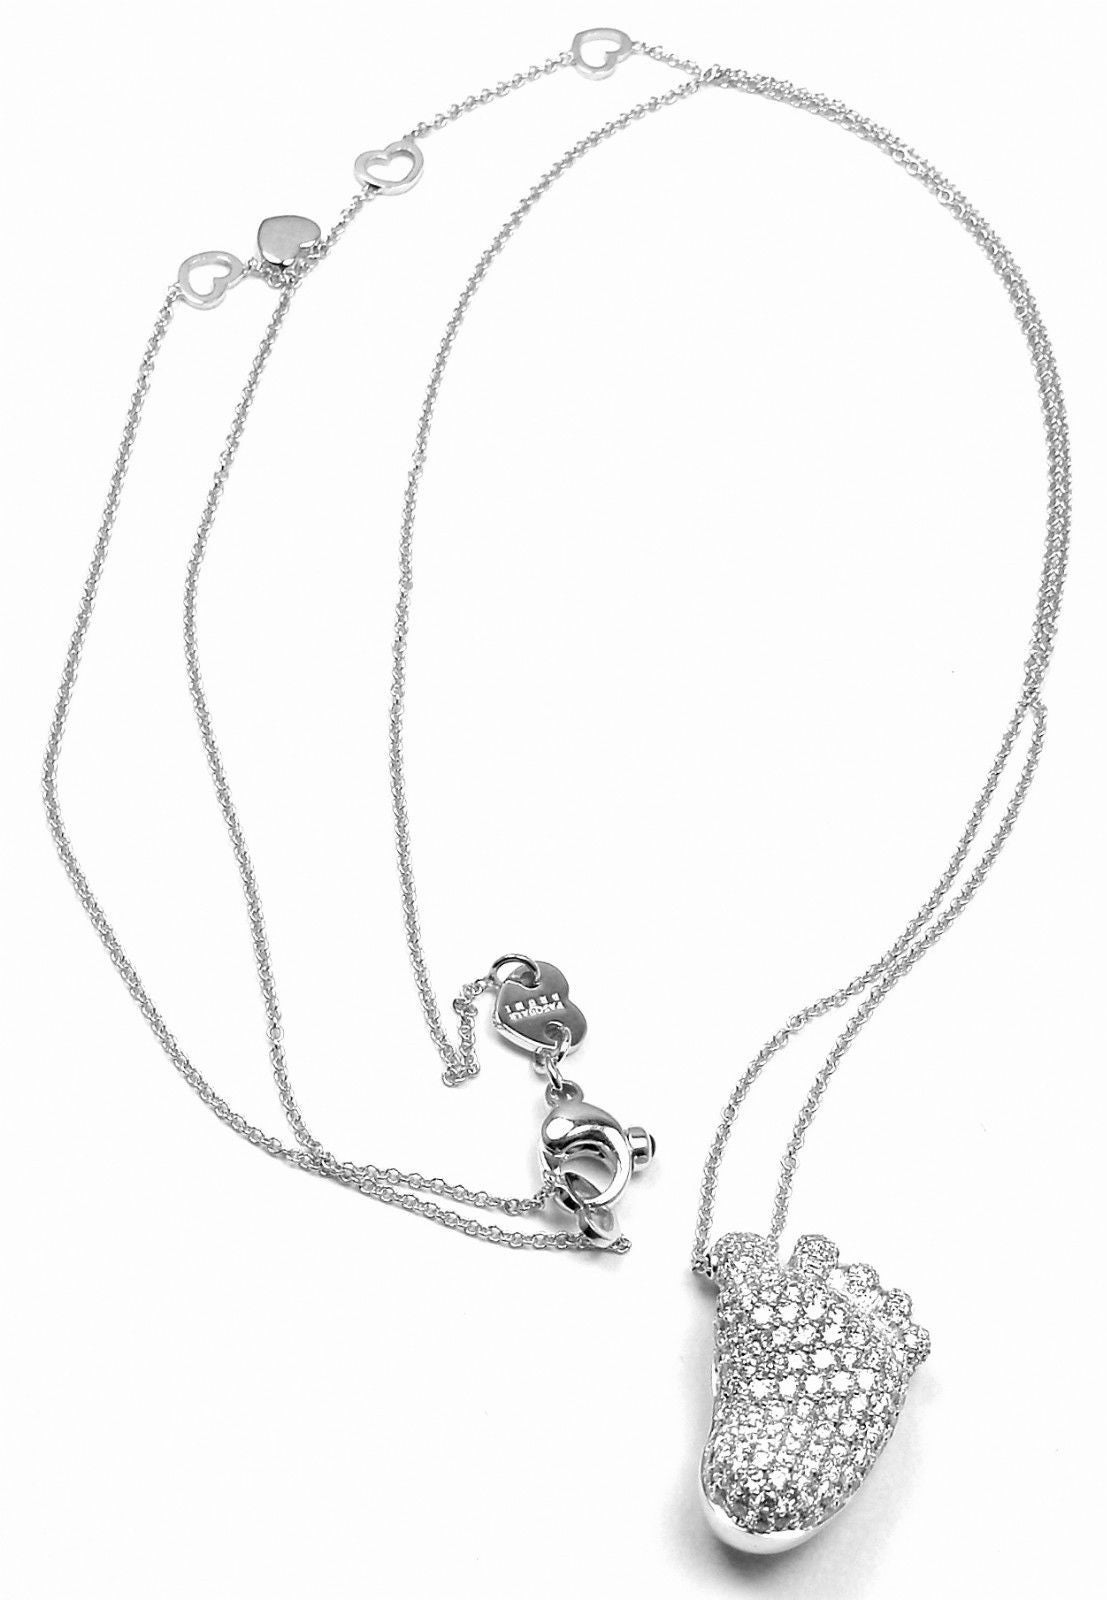 18k White Gold ORME Diamond Foot Pendant Necklace by Pasquale Bruni. 
With Round brilliant cut diamonds VS1 clarity, G color total weight approx. 1.72ct

This necklace comes with Box, Certificate and Tag.

Details:
Length: 20